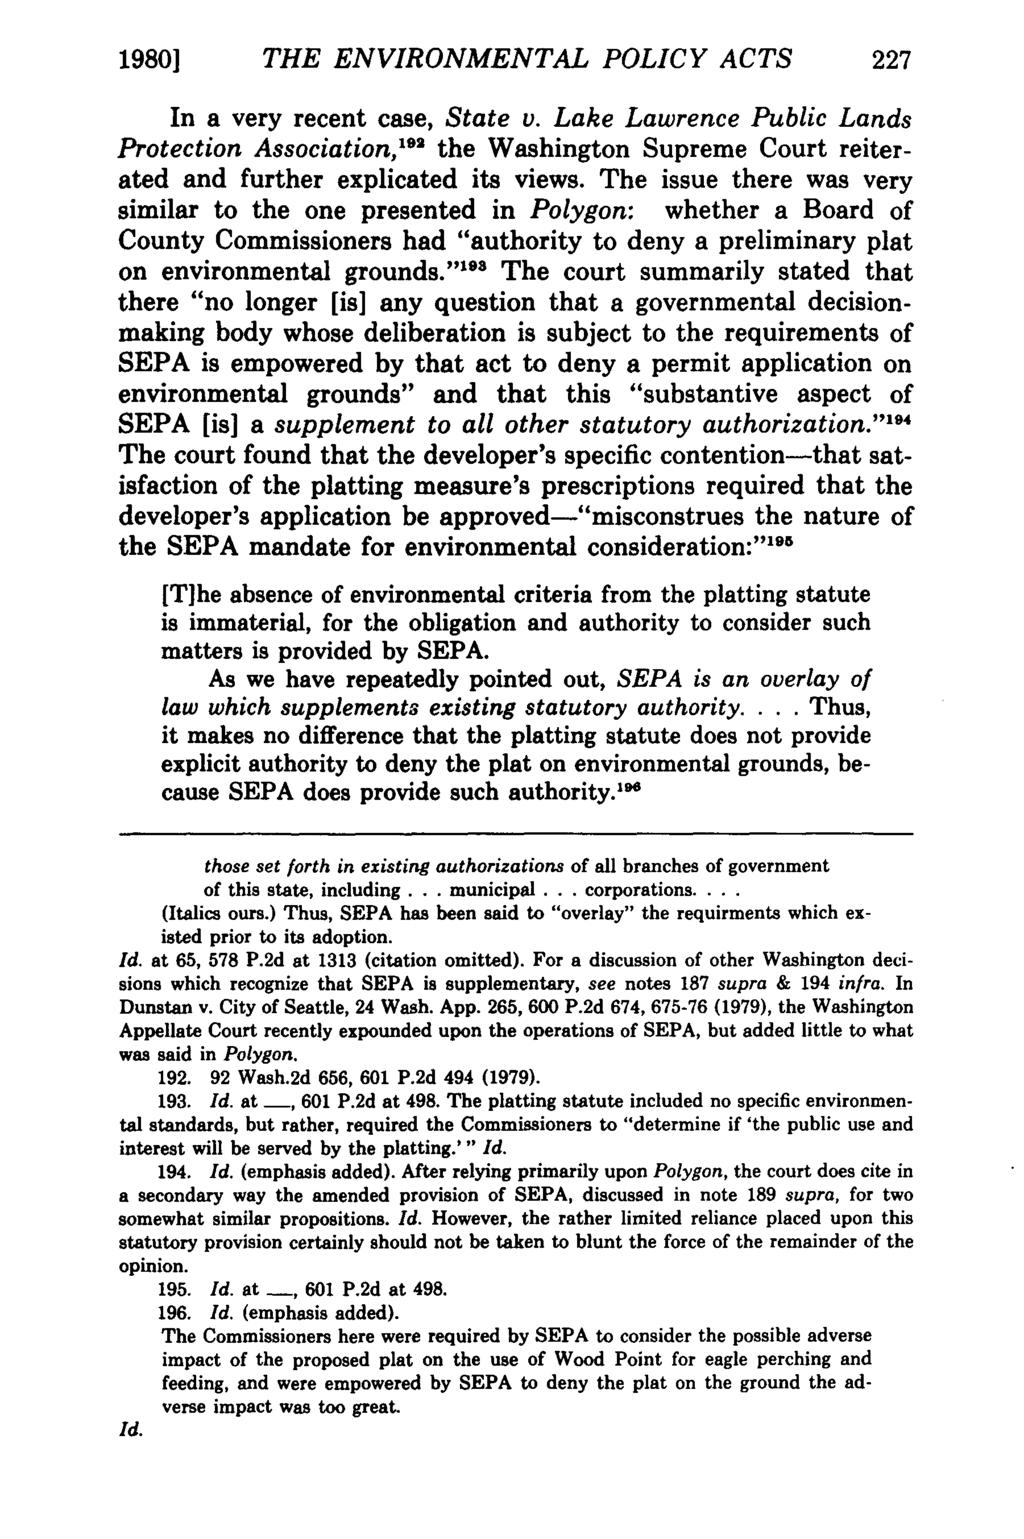 1980) THE ENVIRONMENTAL POLICY ACTS 227 In a very recent case, State v. Lake Lawrence Public Lands Protection Association, 191 the Washington Supreme Court reiterated and further explicated its views.